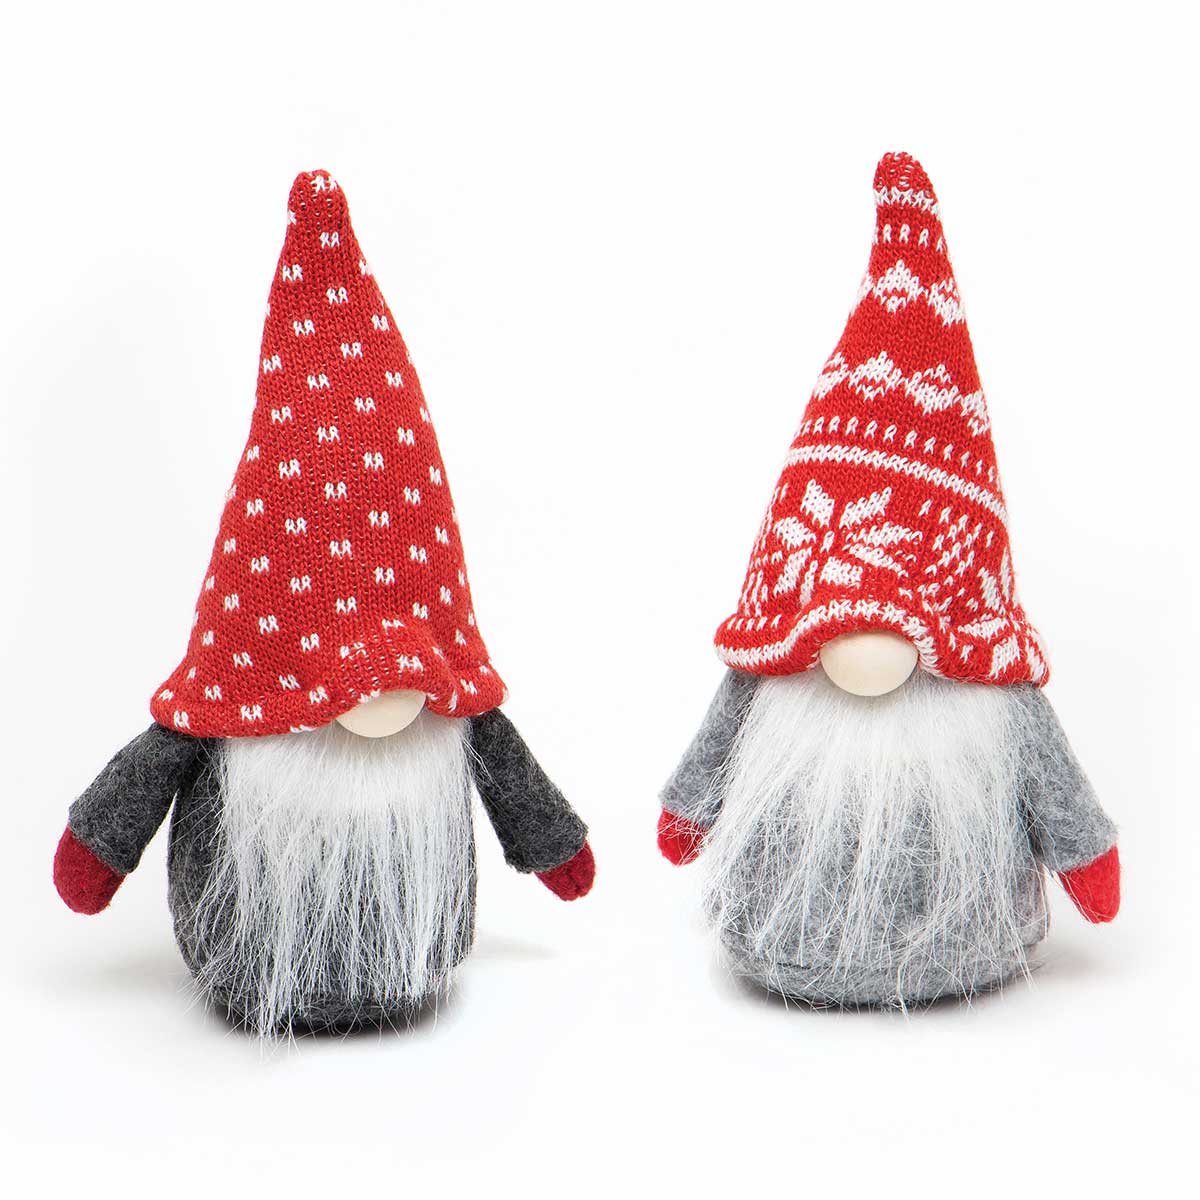 Wee Gnome Ornament Red/Grey with Pindot/Poinsettia Knit Hat et o